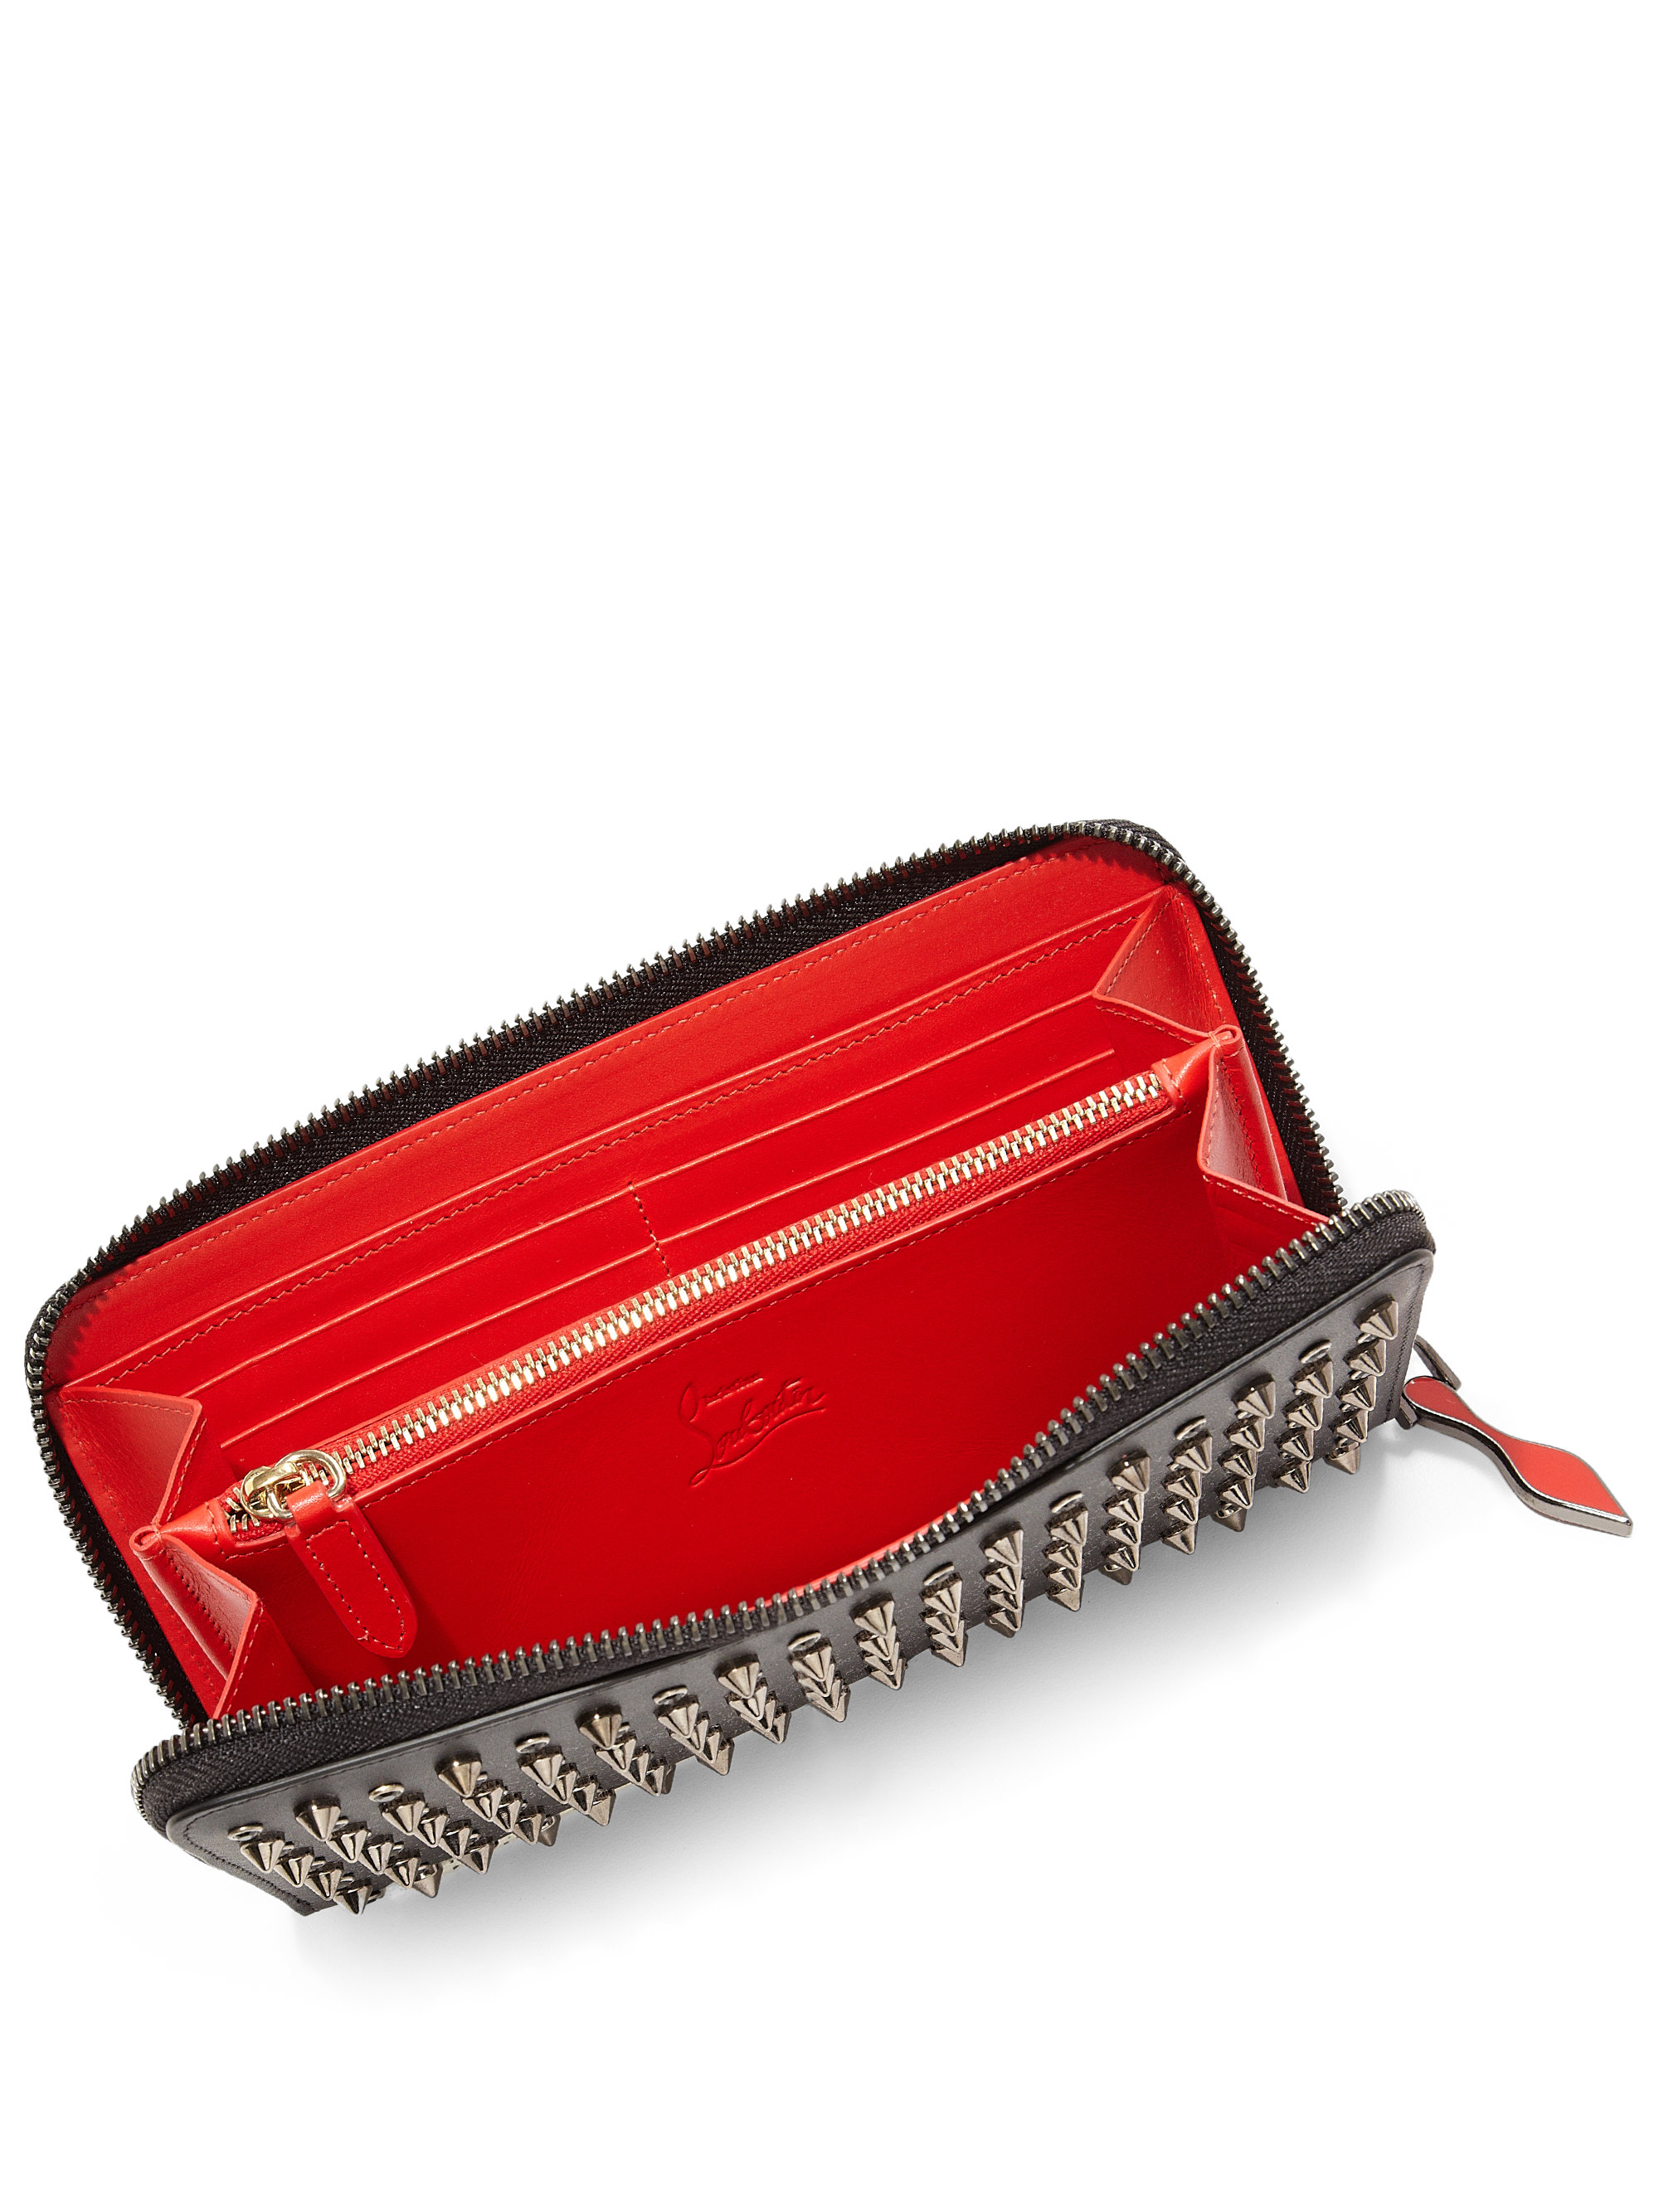 Christian Louboutin Panettone Studded Wallet in Black | Lyst